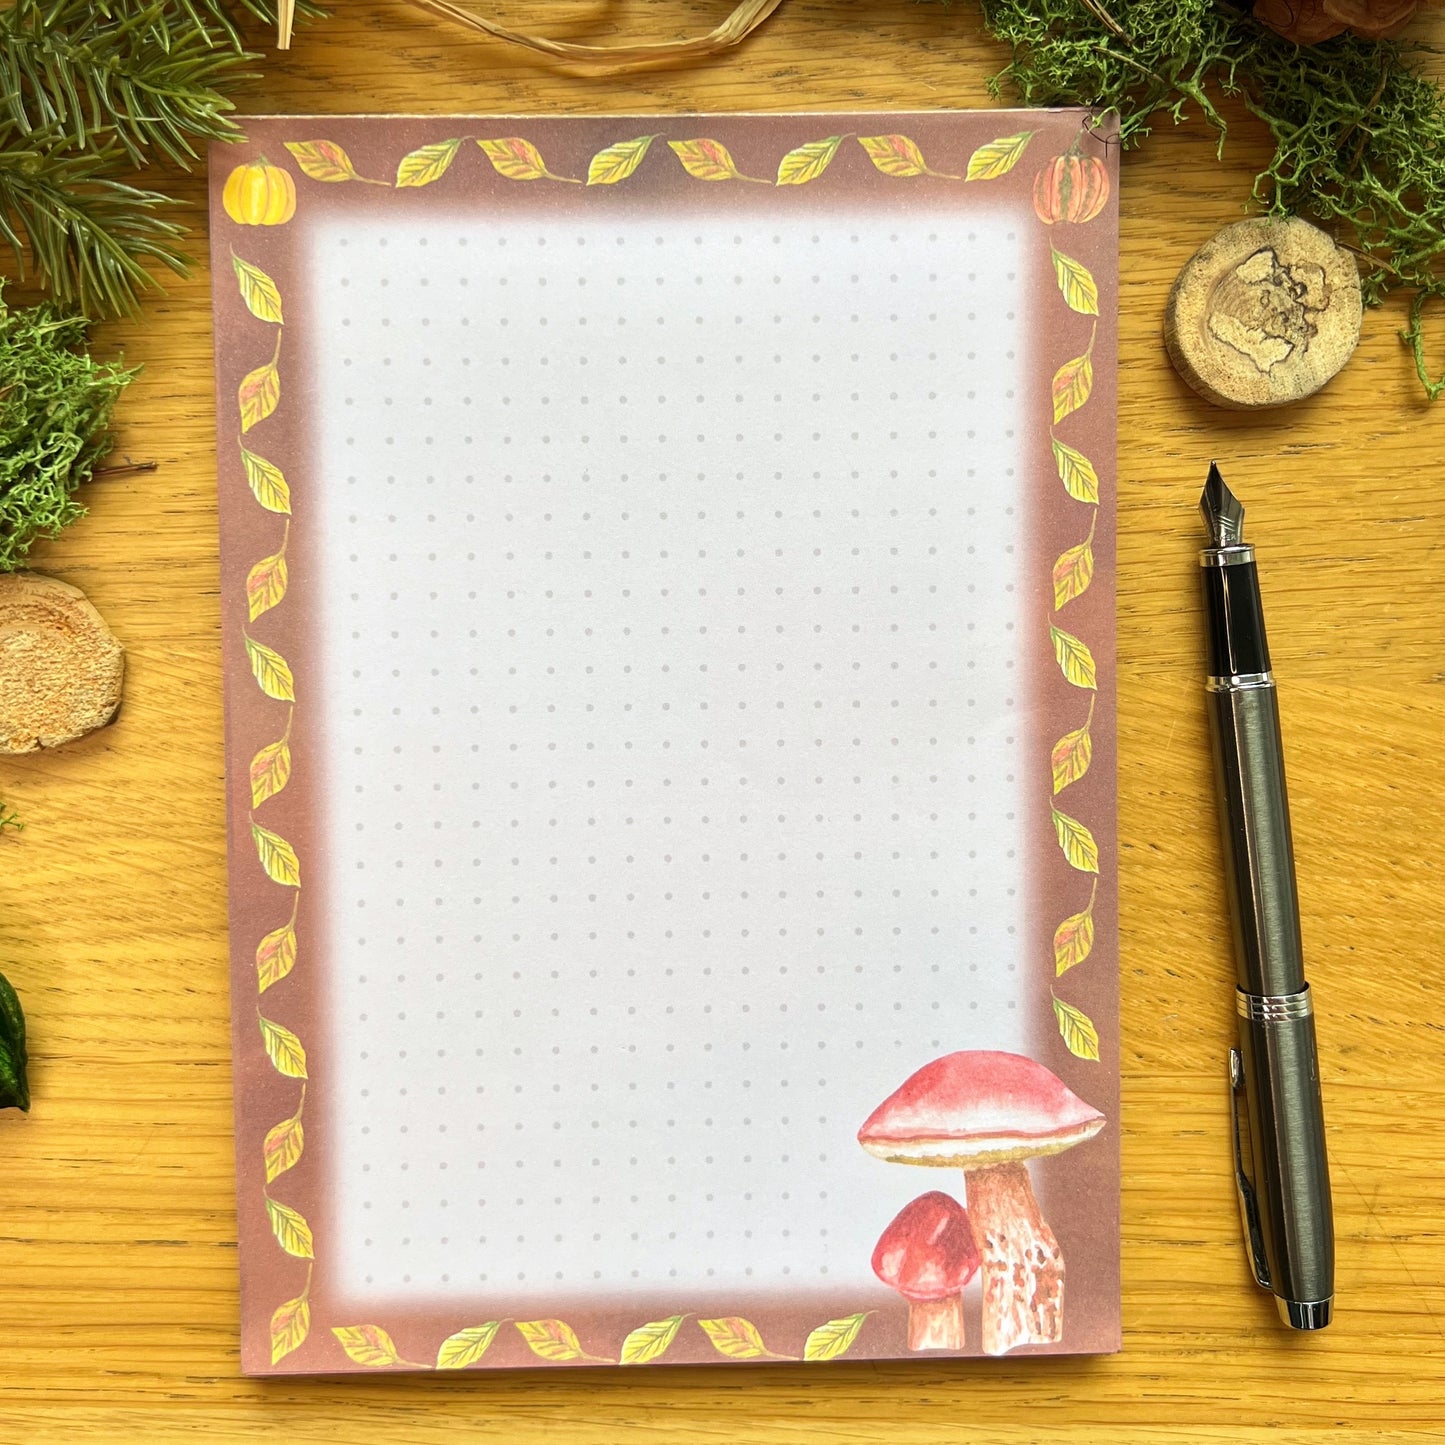 Autumnal mushroom illustrated notepad with warm brown leaf and pumpkin illustrated border around the page. The writing paper is subtly dotted in a grid. Notepad is on a wooden desk decorated with green moss, straw, pine cones and wooden slices and a fountain ink pen